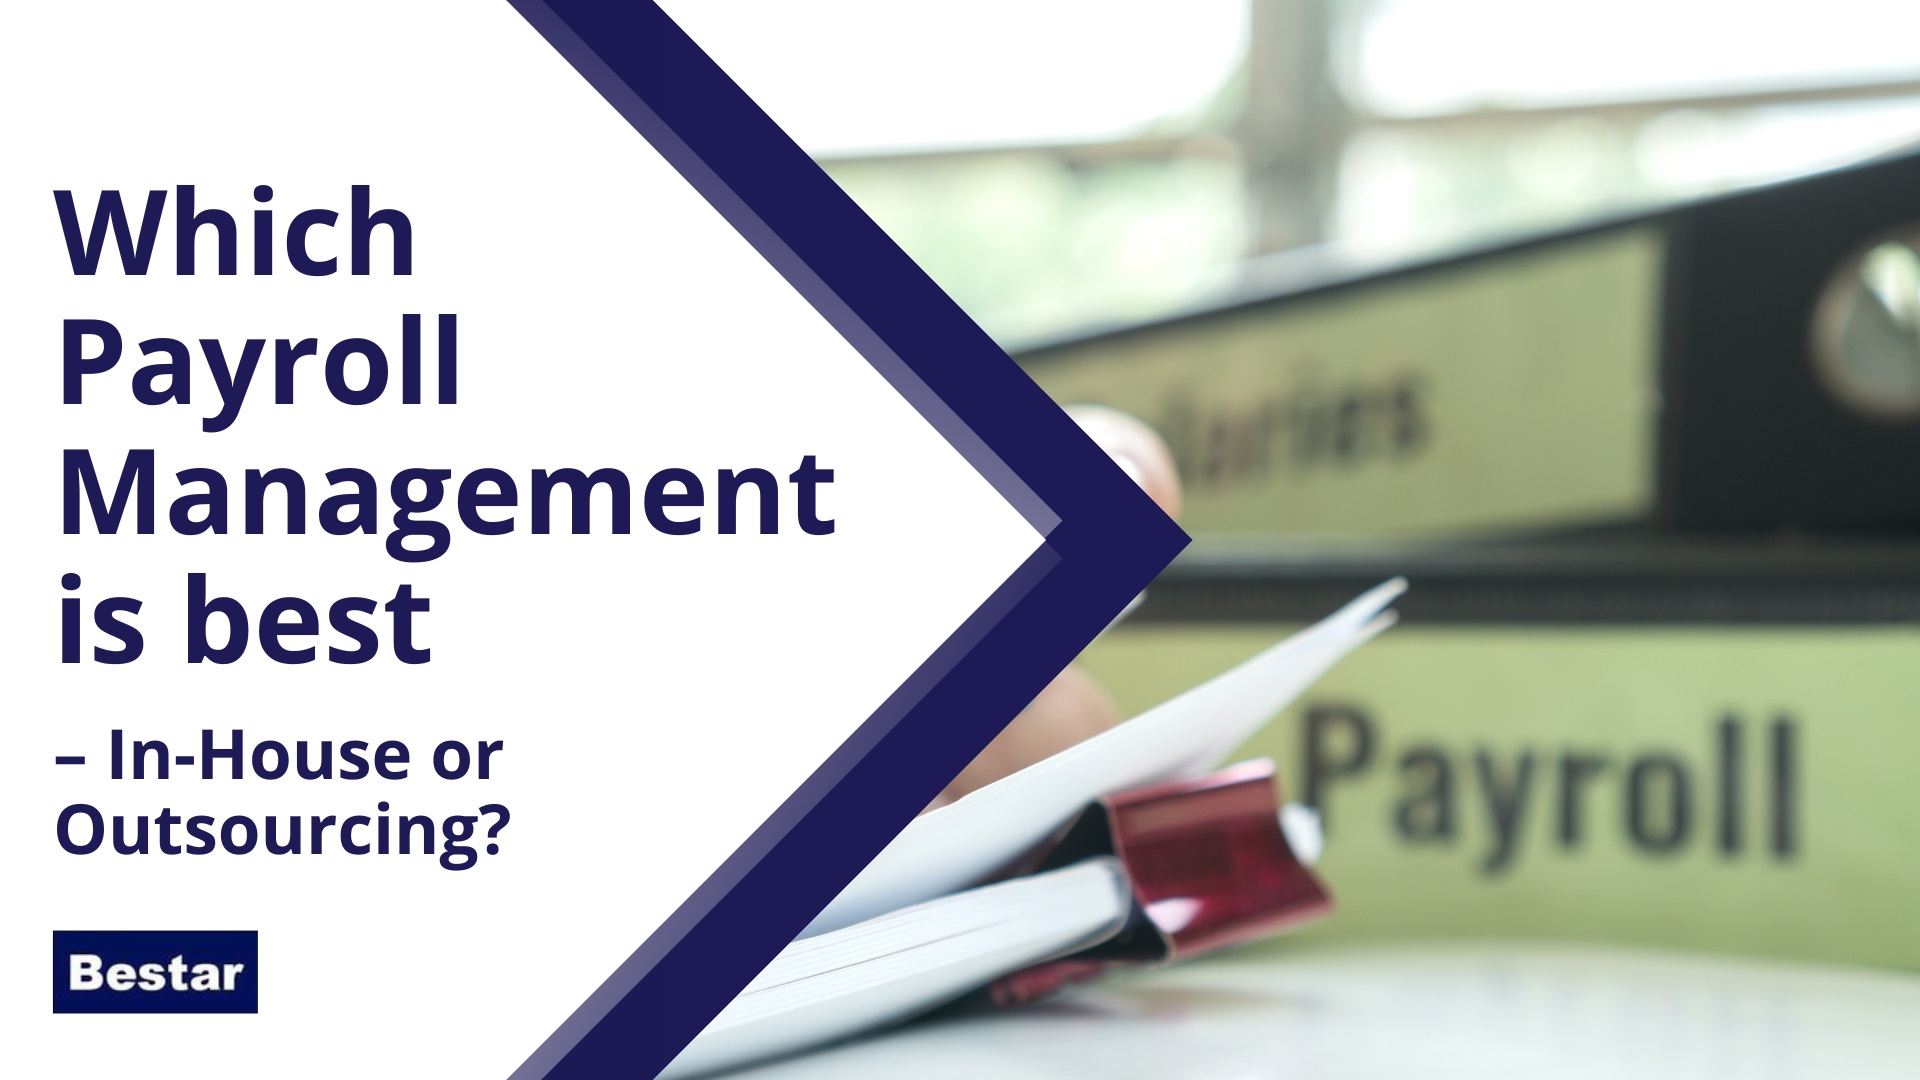 Which Payroll Management is best In house or Outsourcing